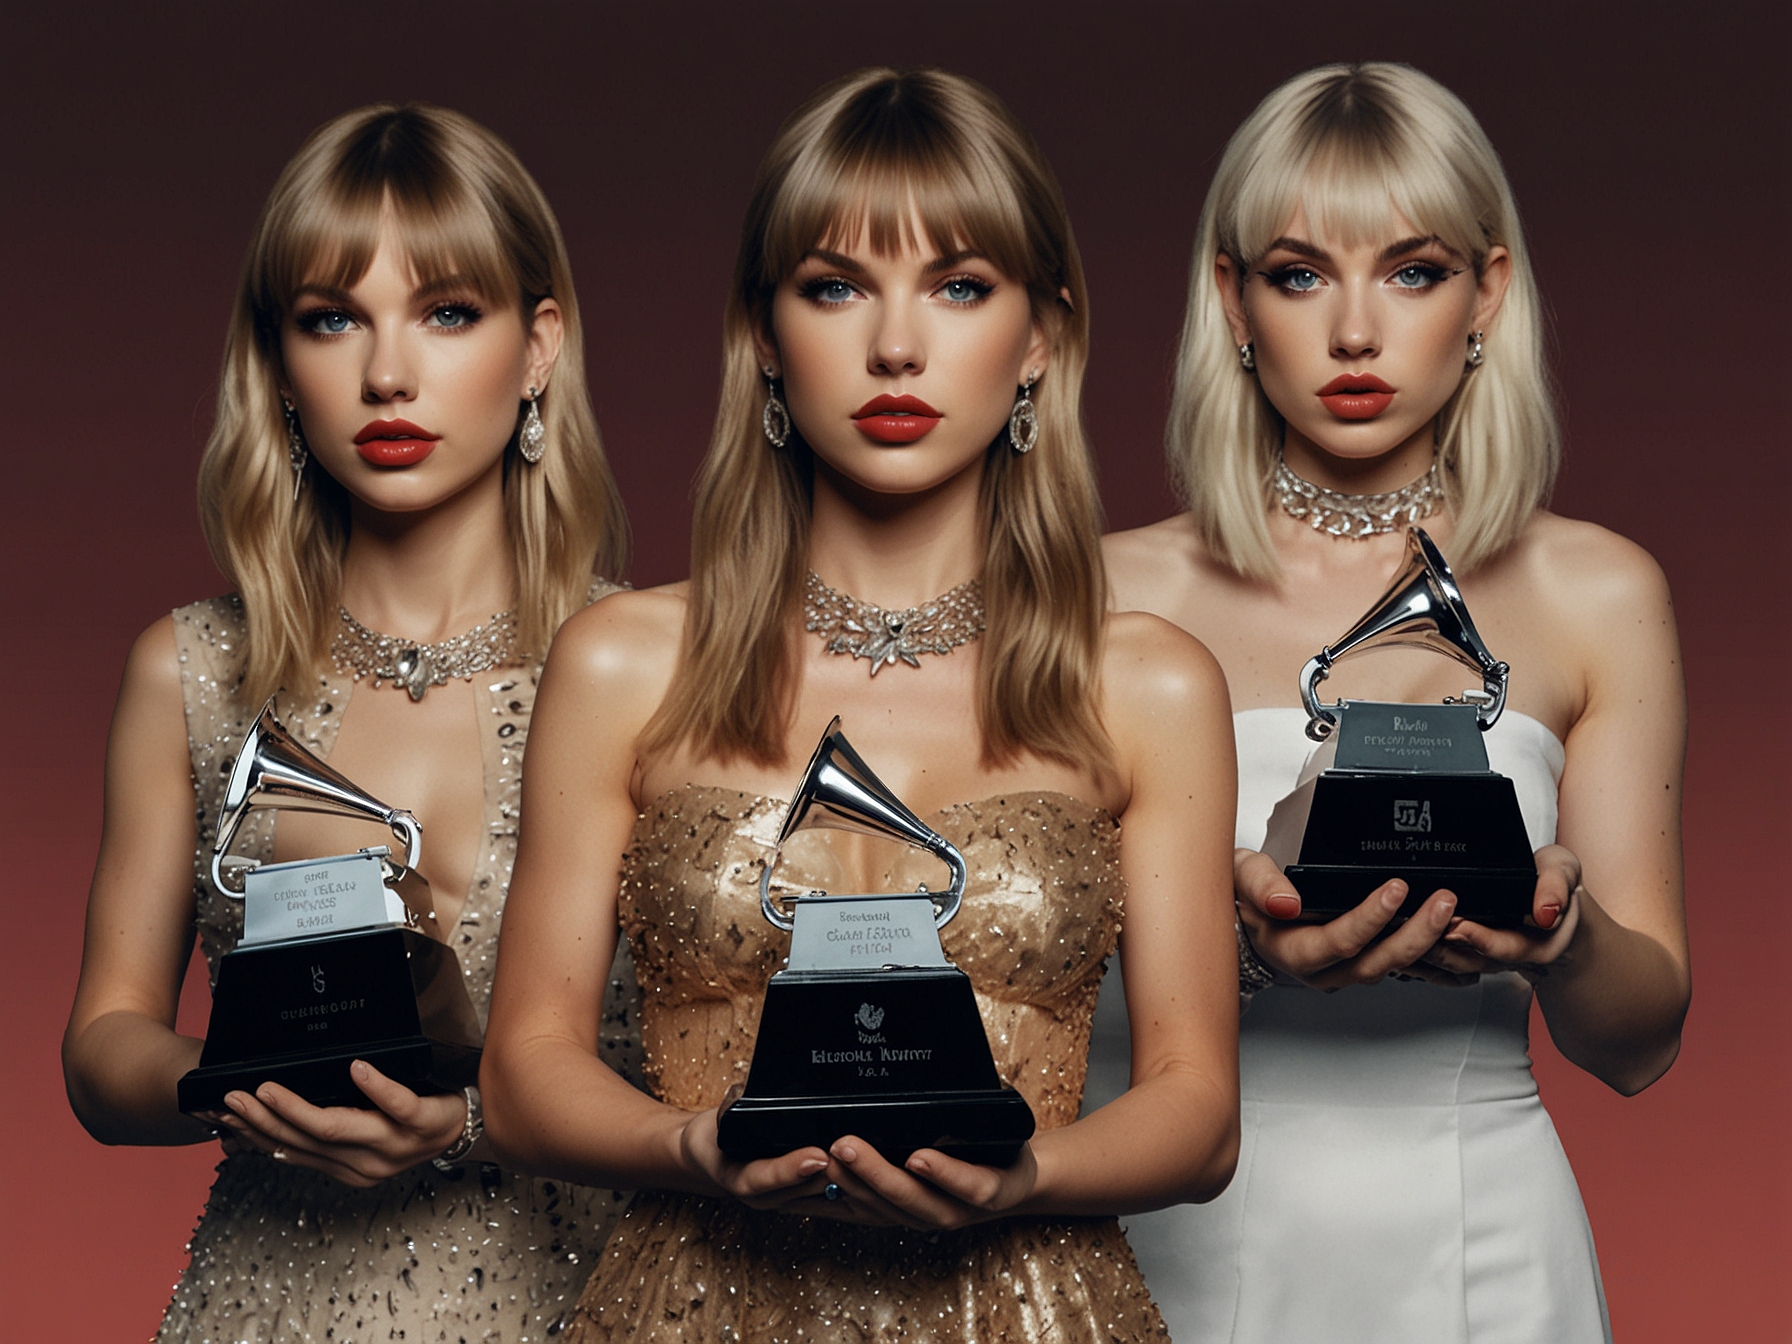 Illustration of Taylor Swift holding multiple music awards, symbolizing her dominance on the charts, with smaller images of Charli XCX and Billie Eilish looking concerned.